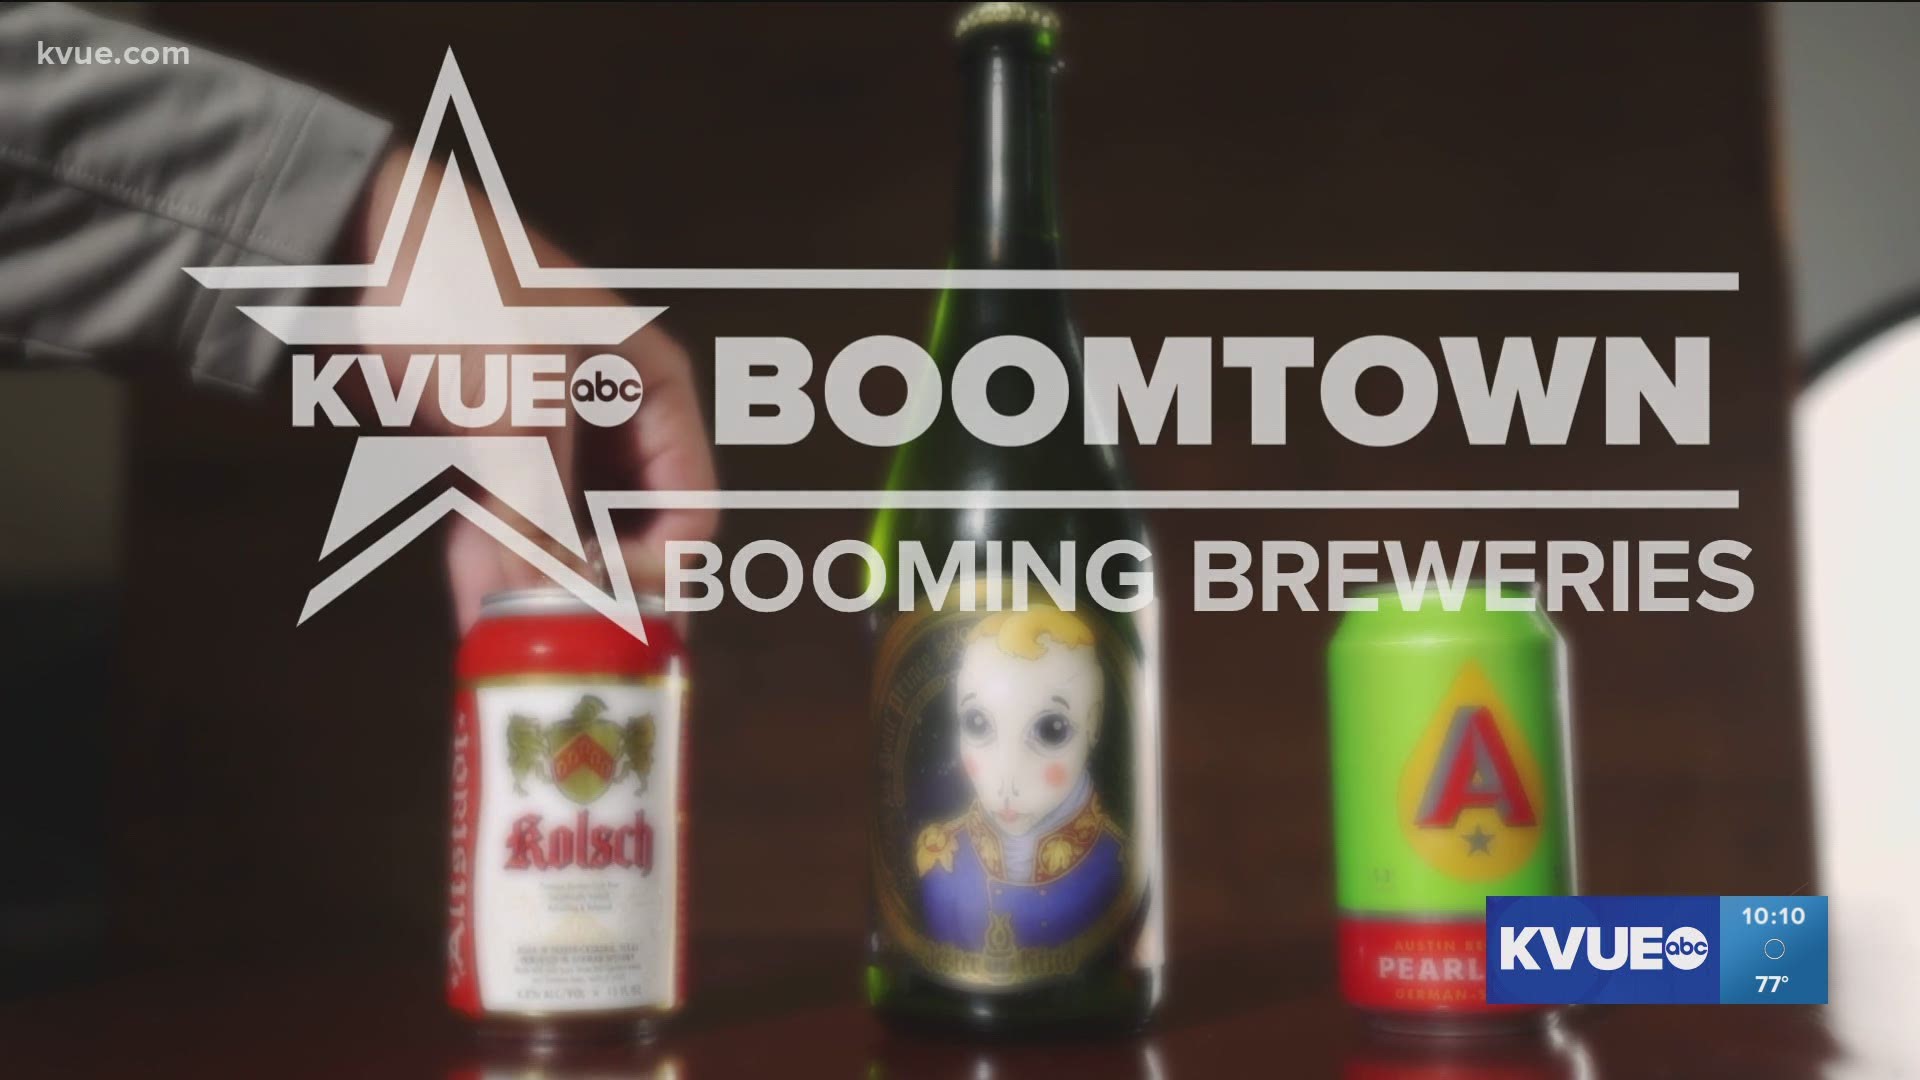 The Central Texas region is a booming place for breweries of all kinds. We talked to three from around the region about the growth of the beer industry.